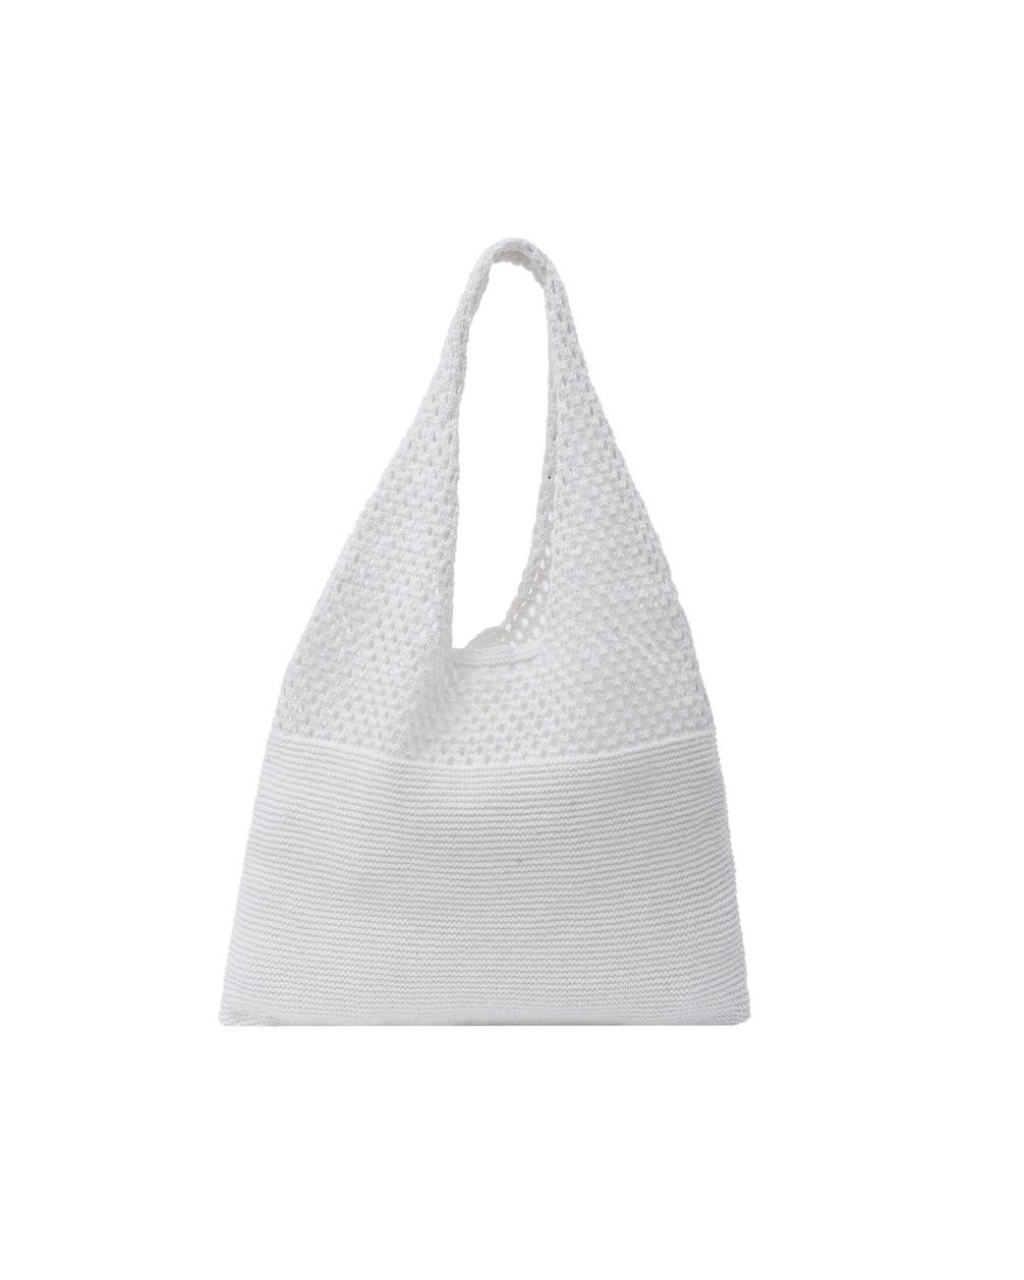 White Mesh Catchall Bag, Daytime Bag by Selini | LIT Boutique